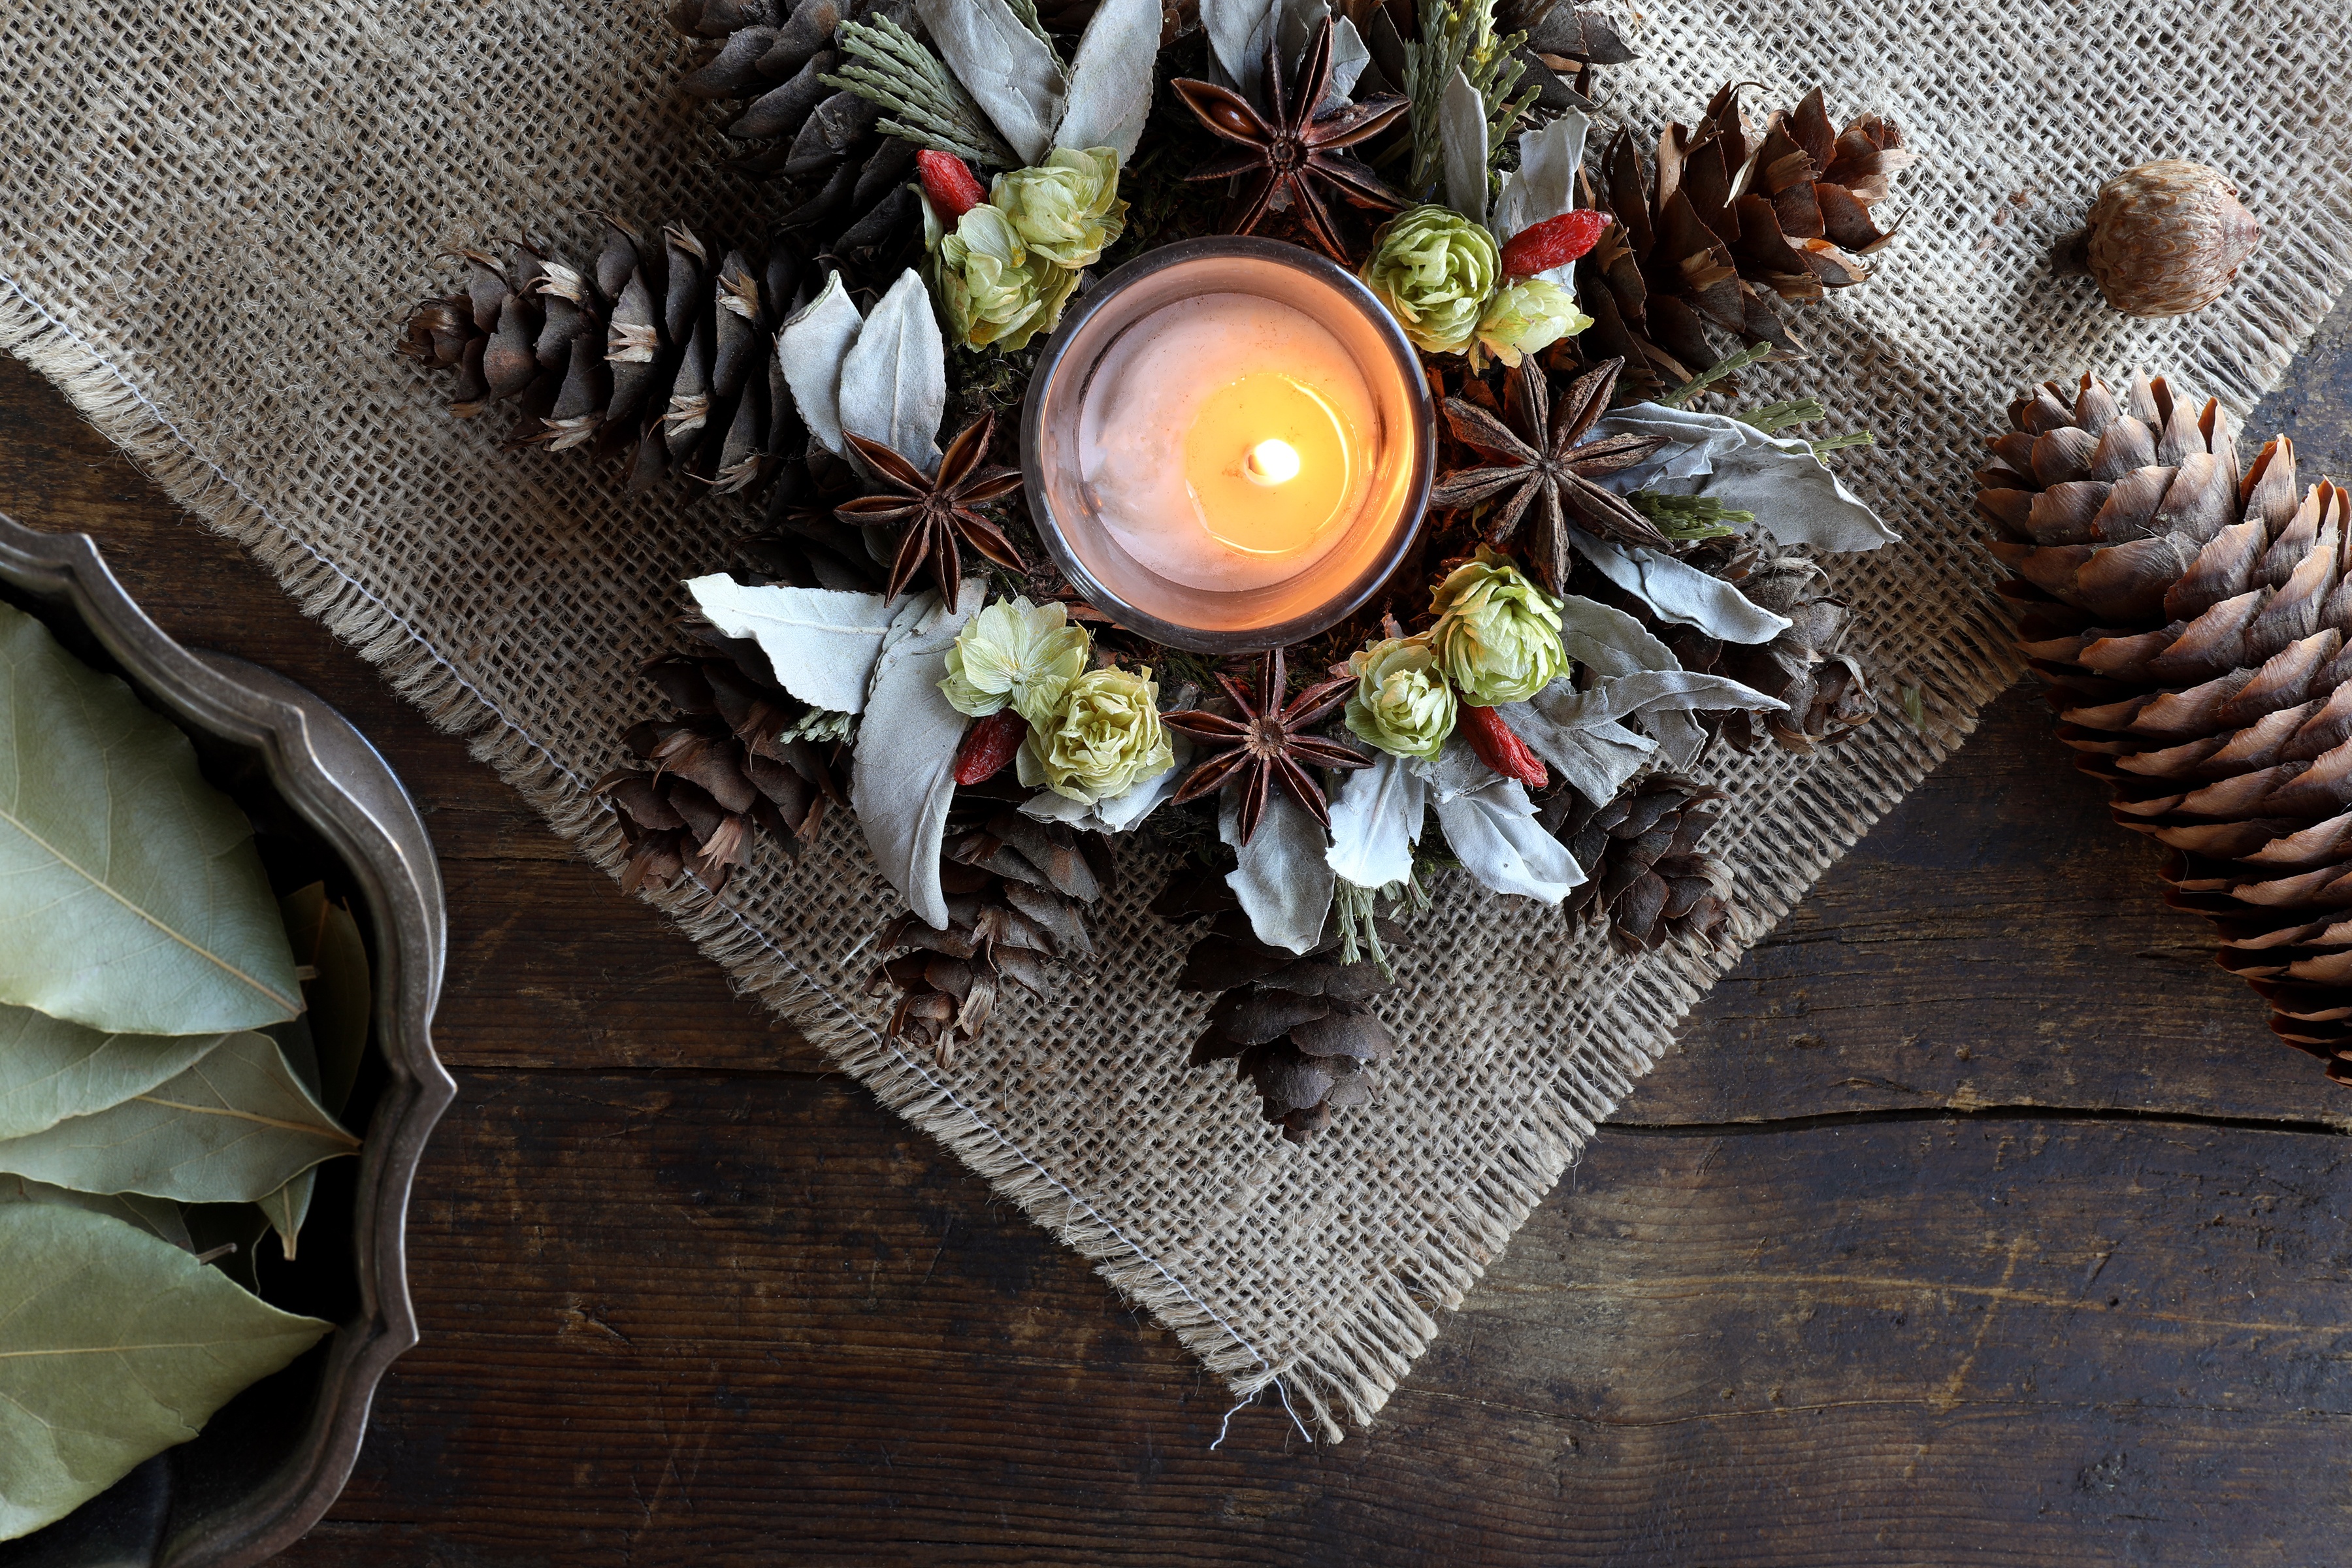 Center piece with holiday foliage decor and candle burning in middle , displayed on rustic wooden table and burlap